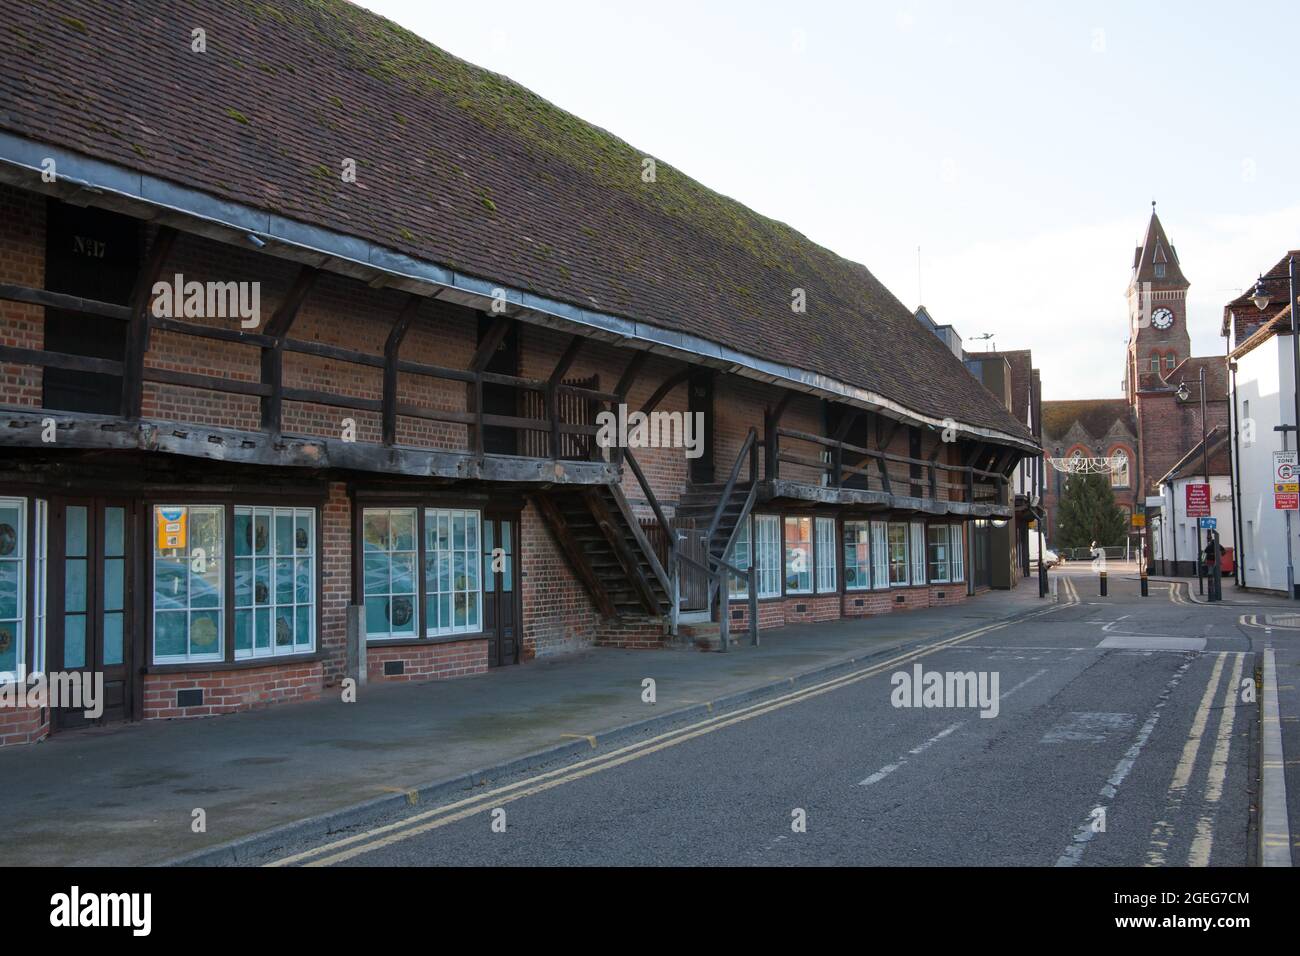 An historic building used for The West Berkshire Museum in Newbury in the UK, taken 19th November 2020 Stock Photo